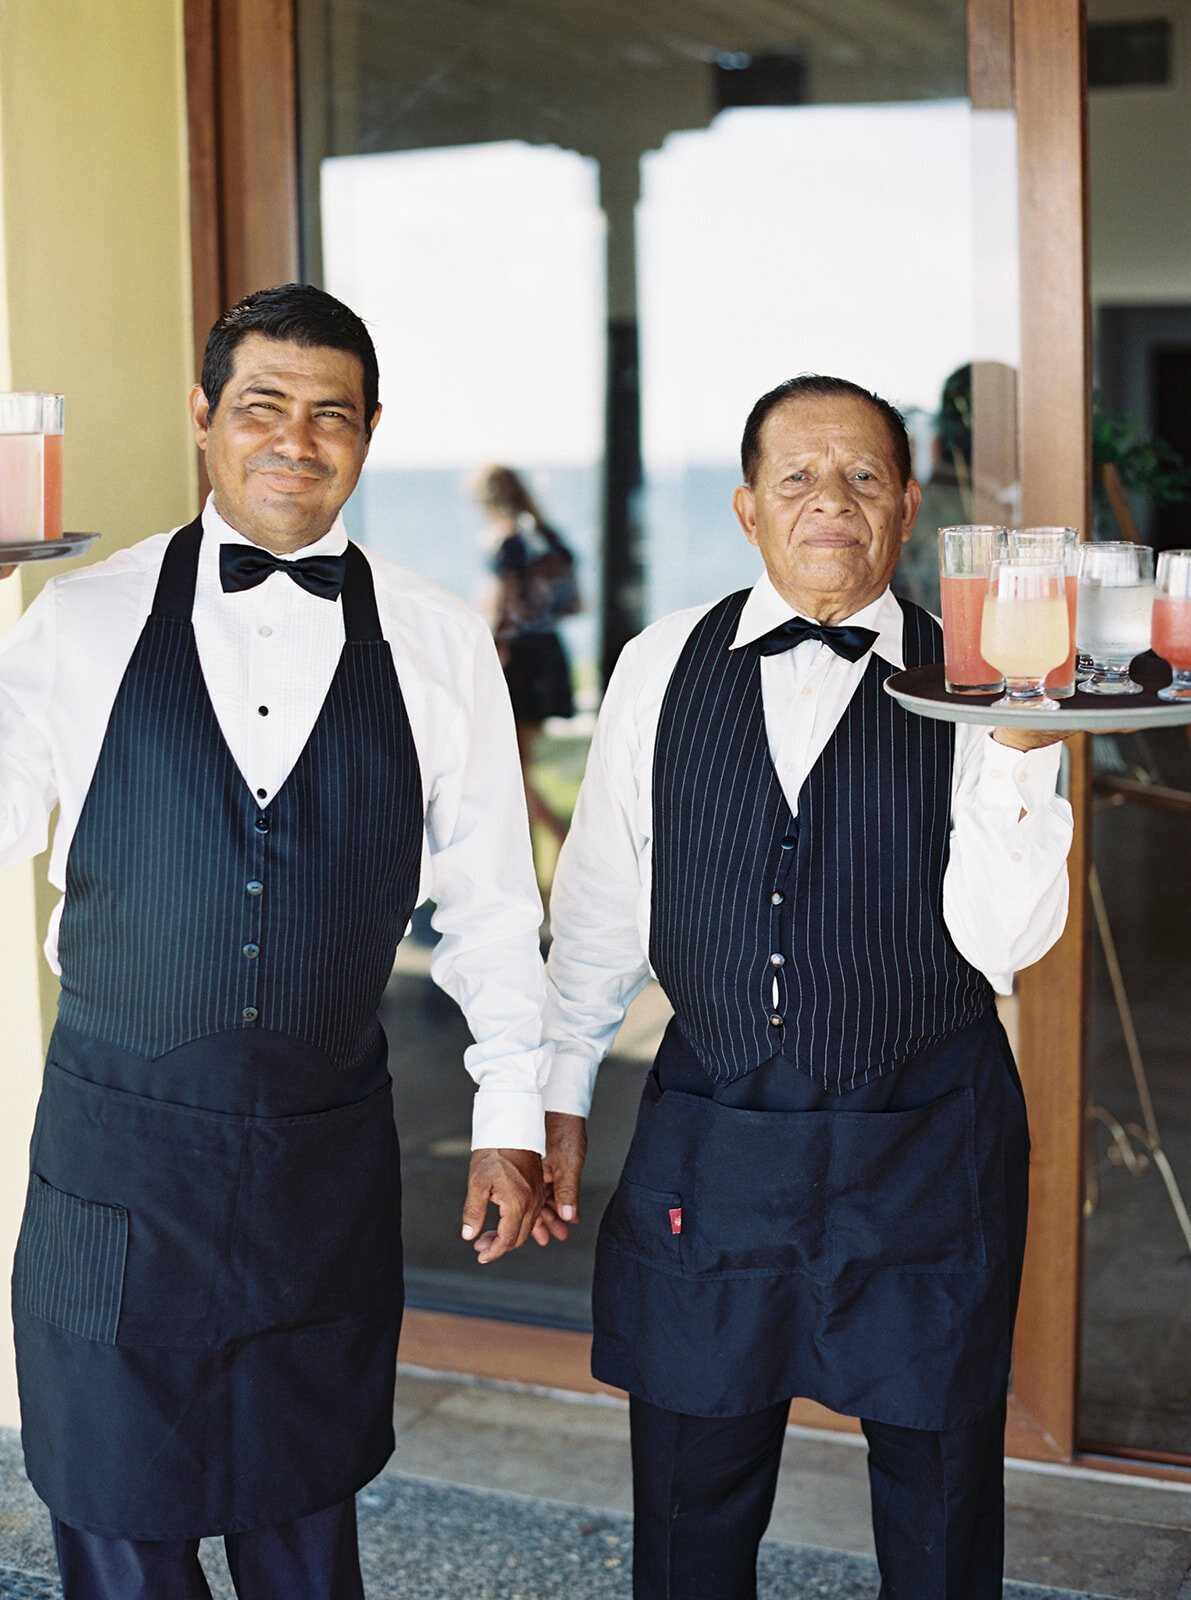 waiters carrying trays with cocktails on them